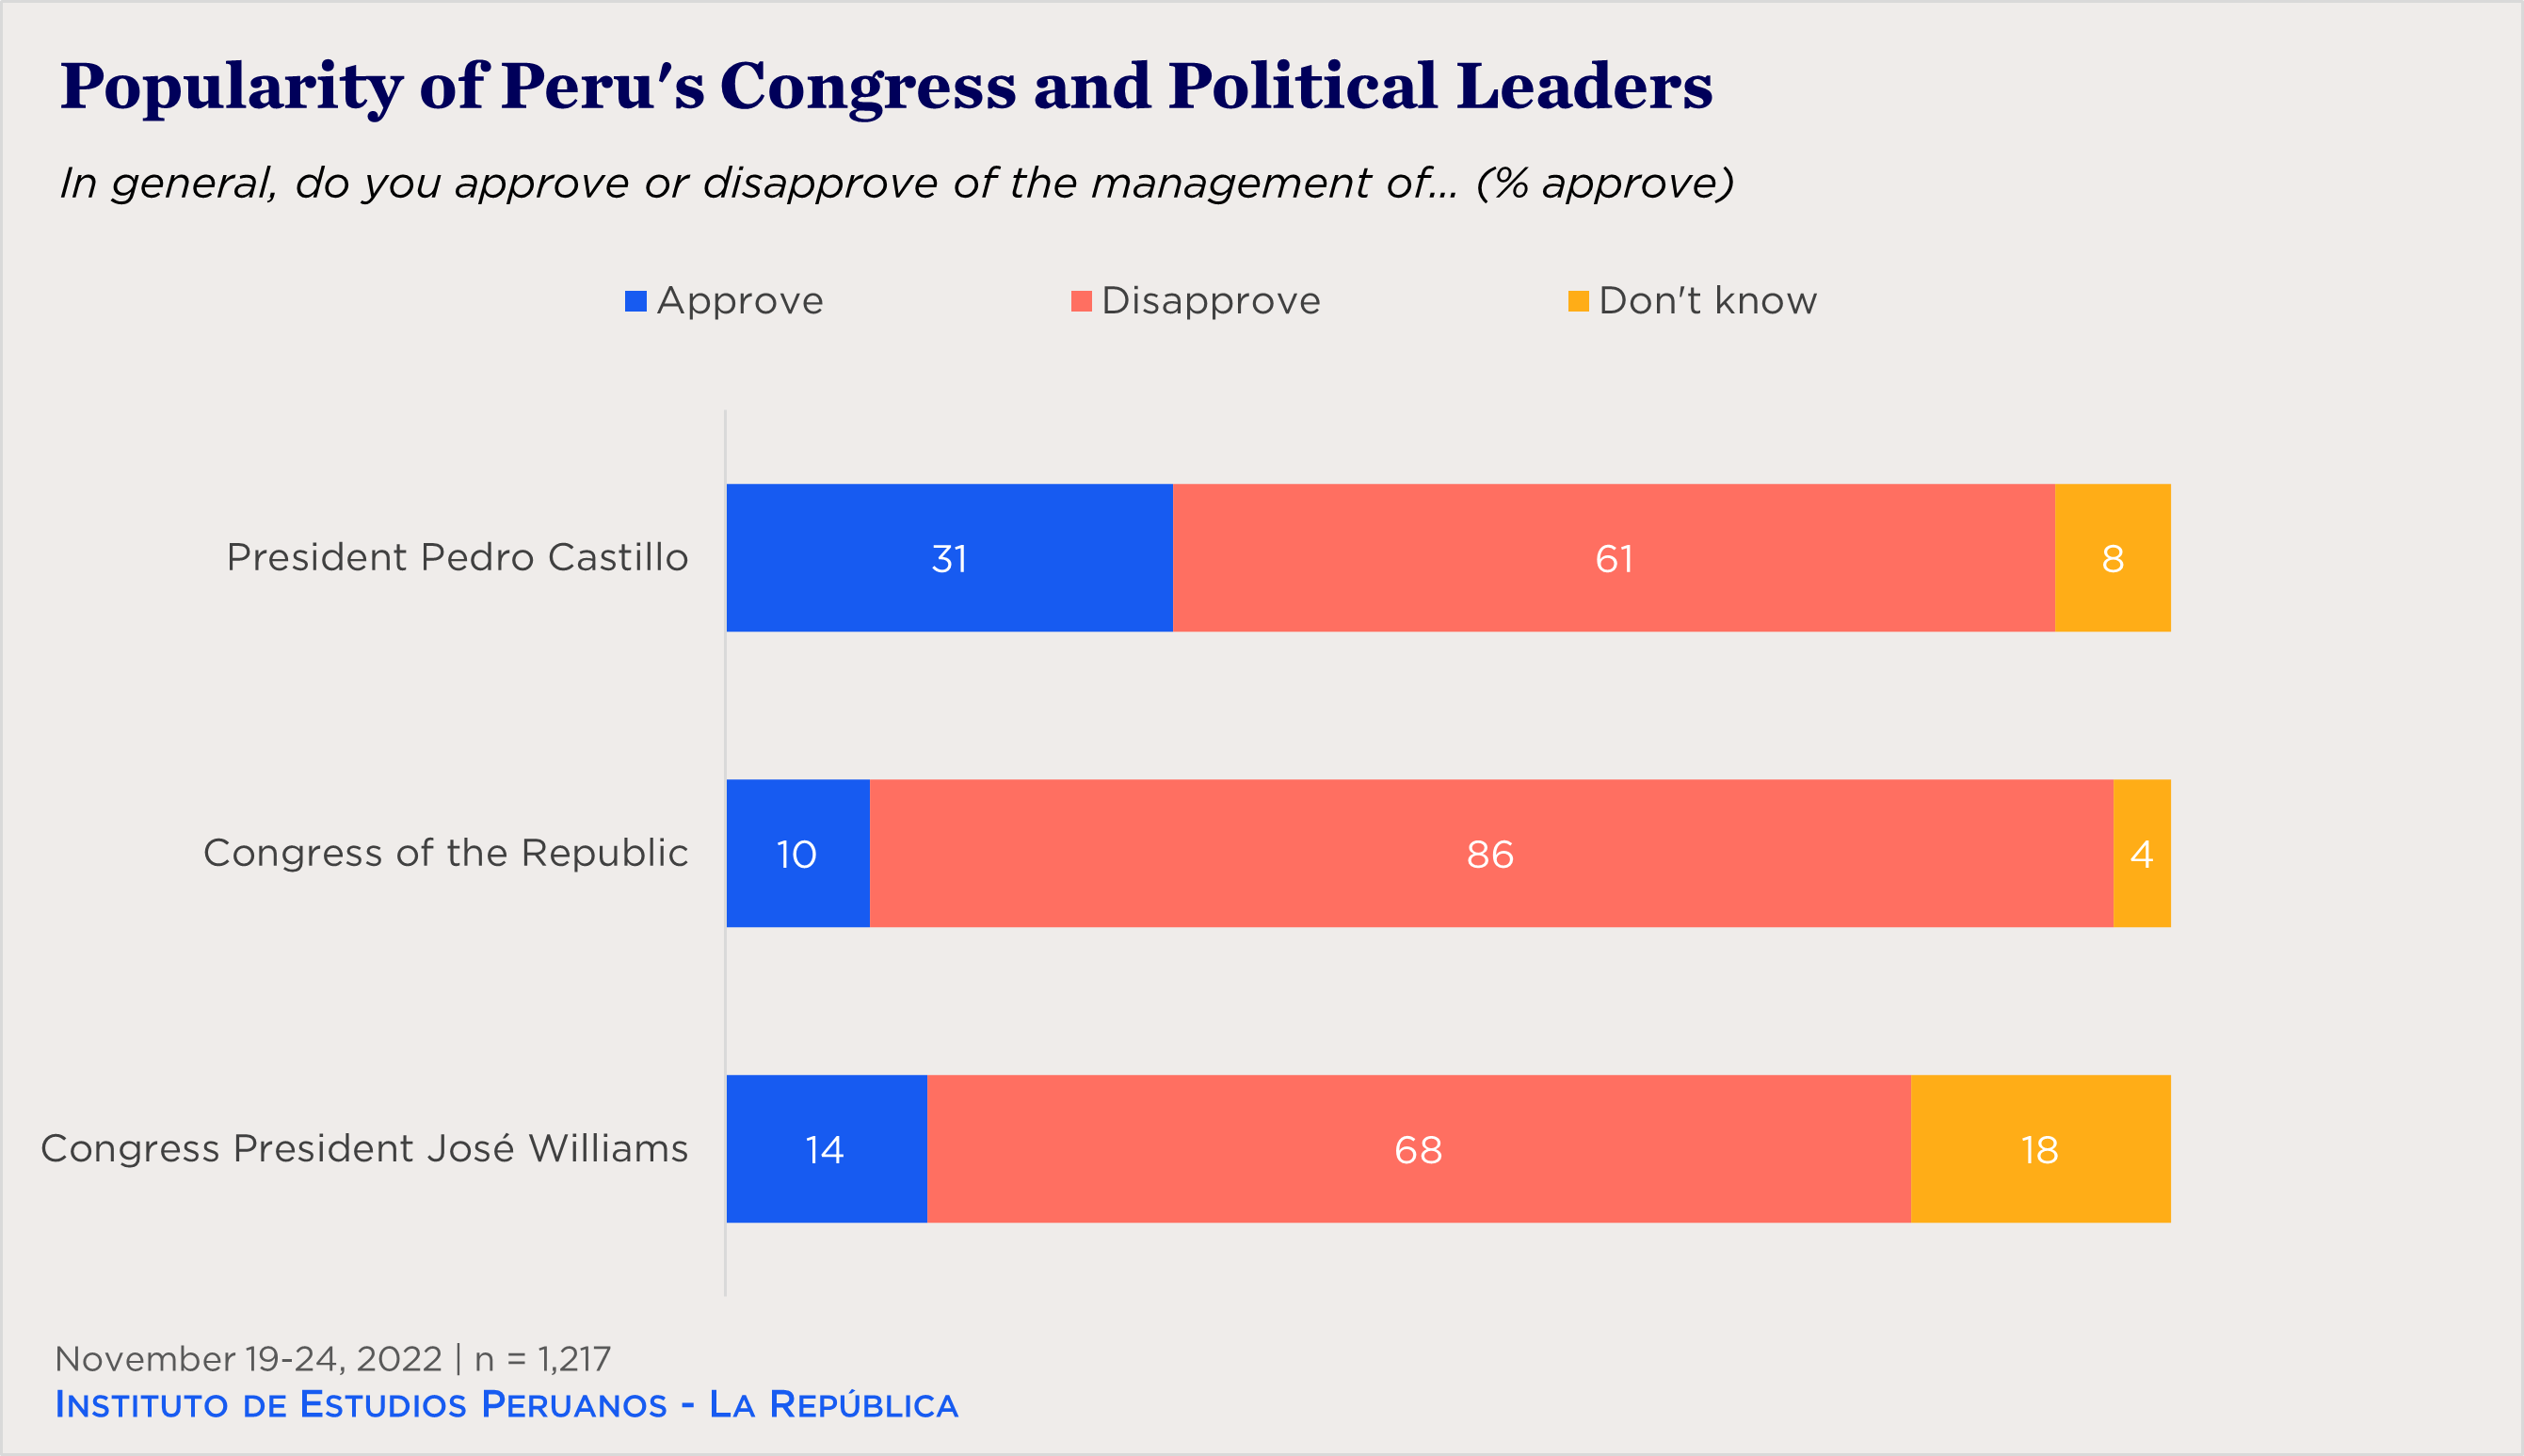 "bar chart showing popularity of Peru's Congress and political leaders"